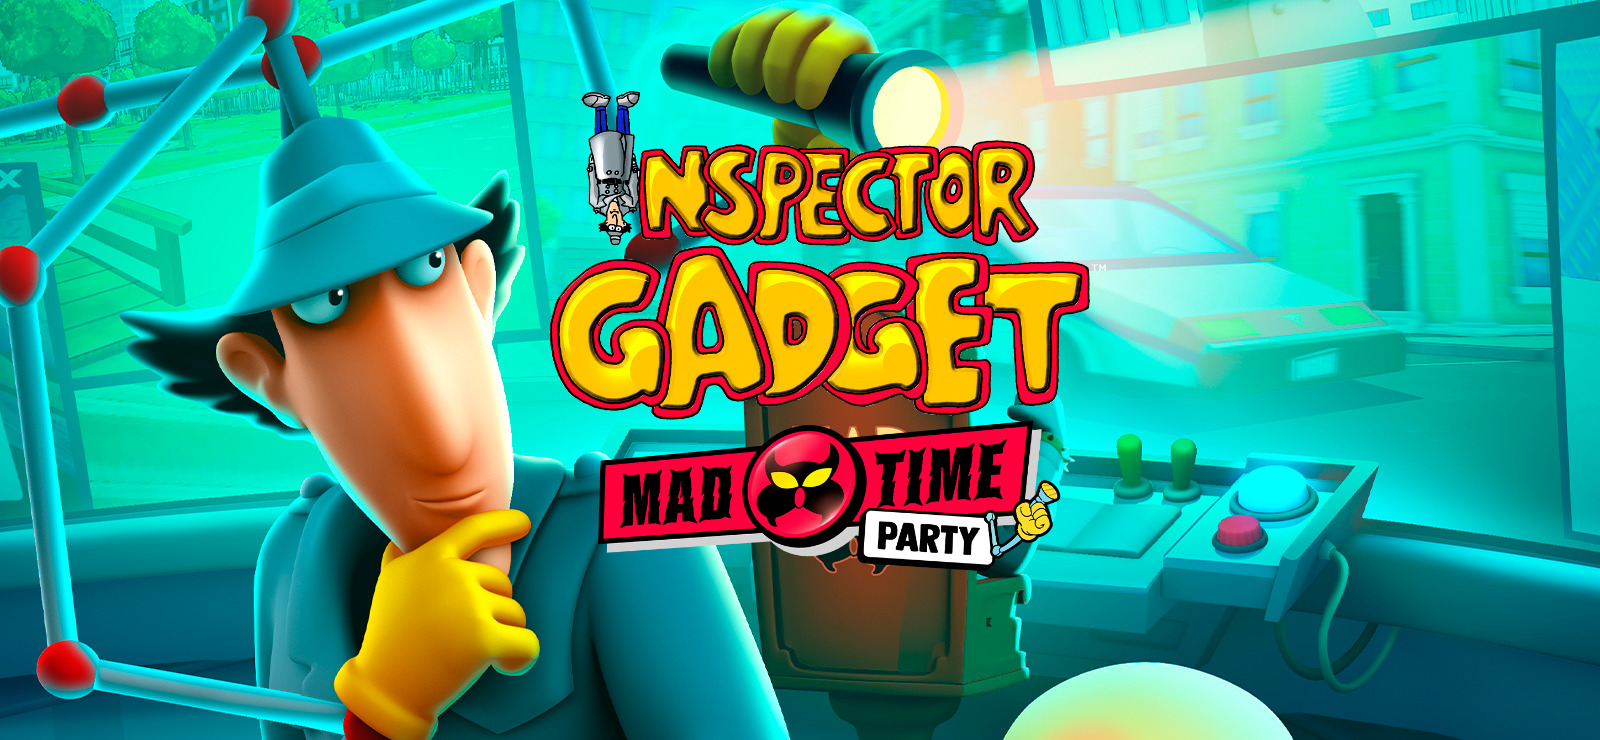 40% Inspector Gadget - MAD Time Party on